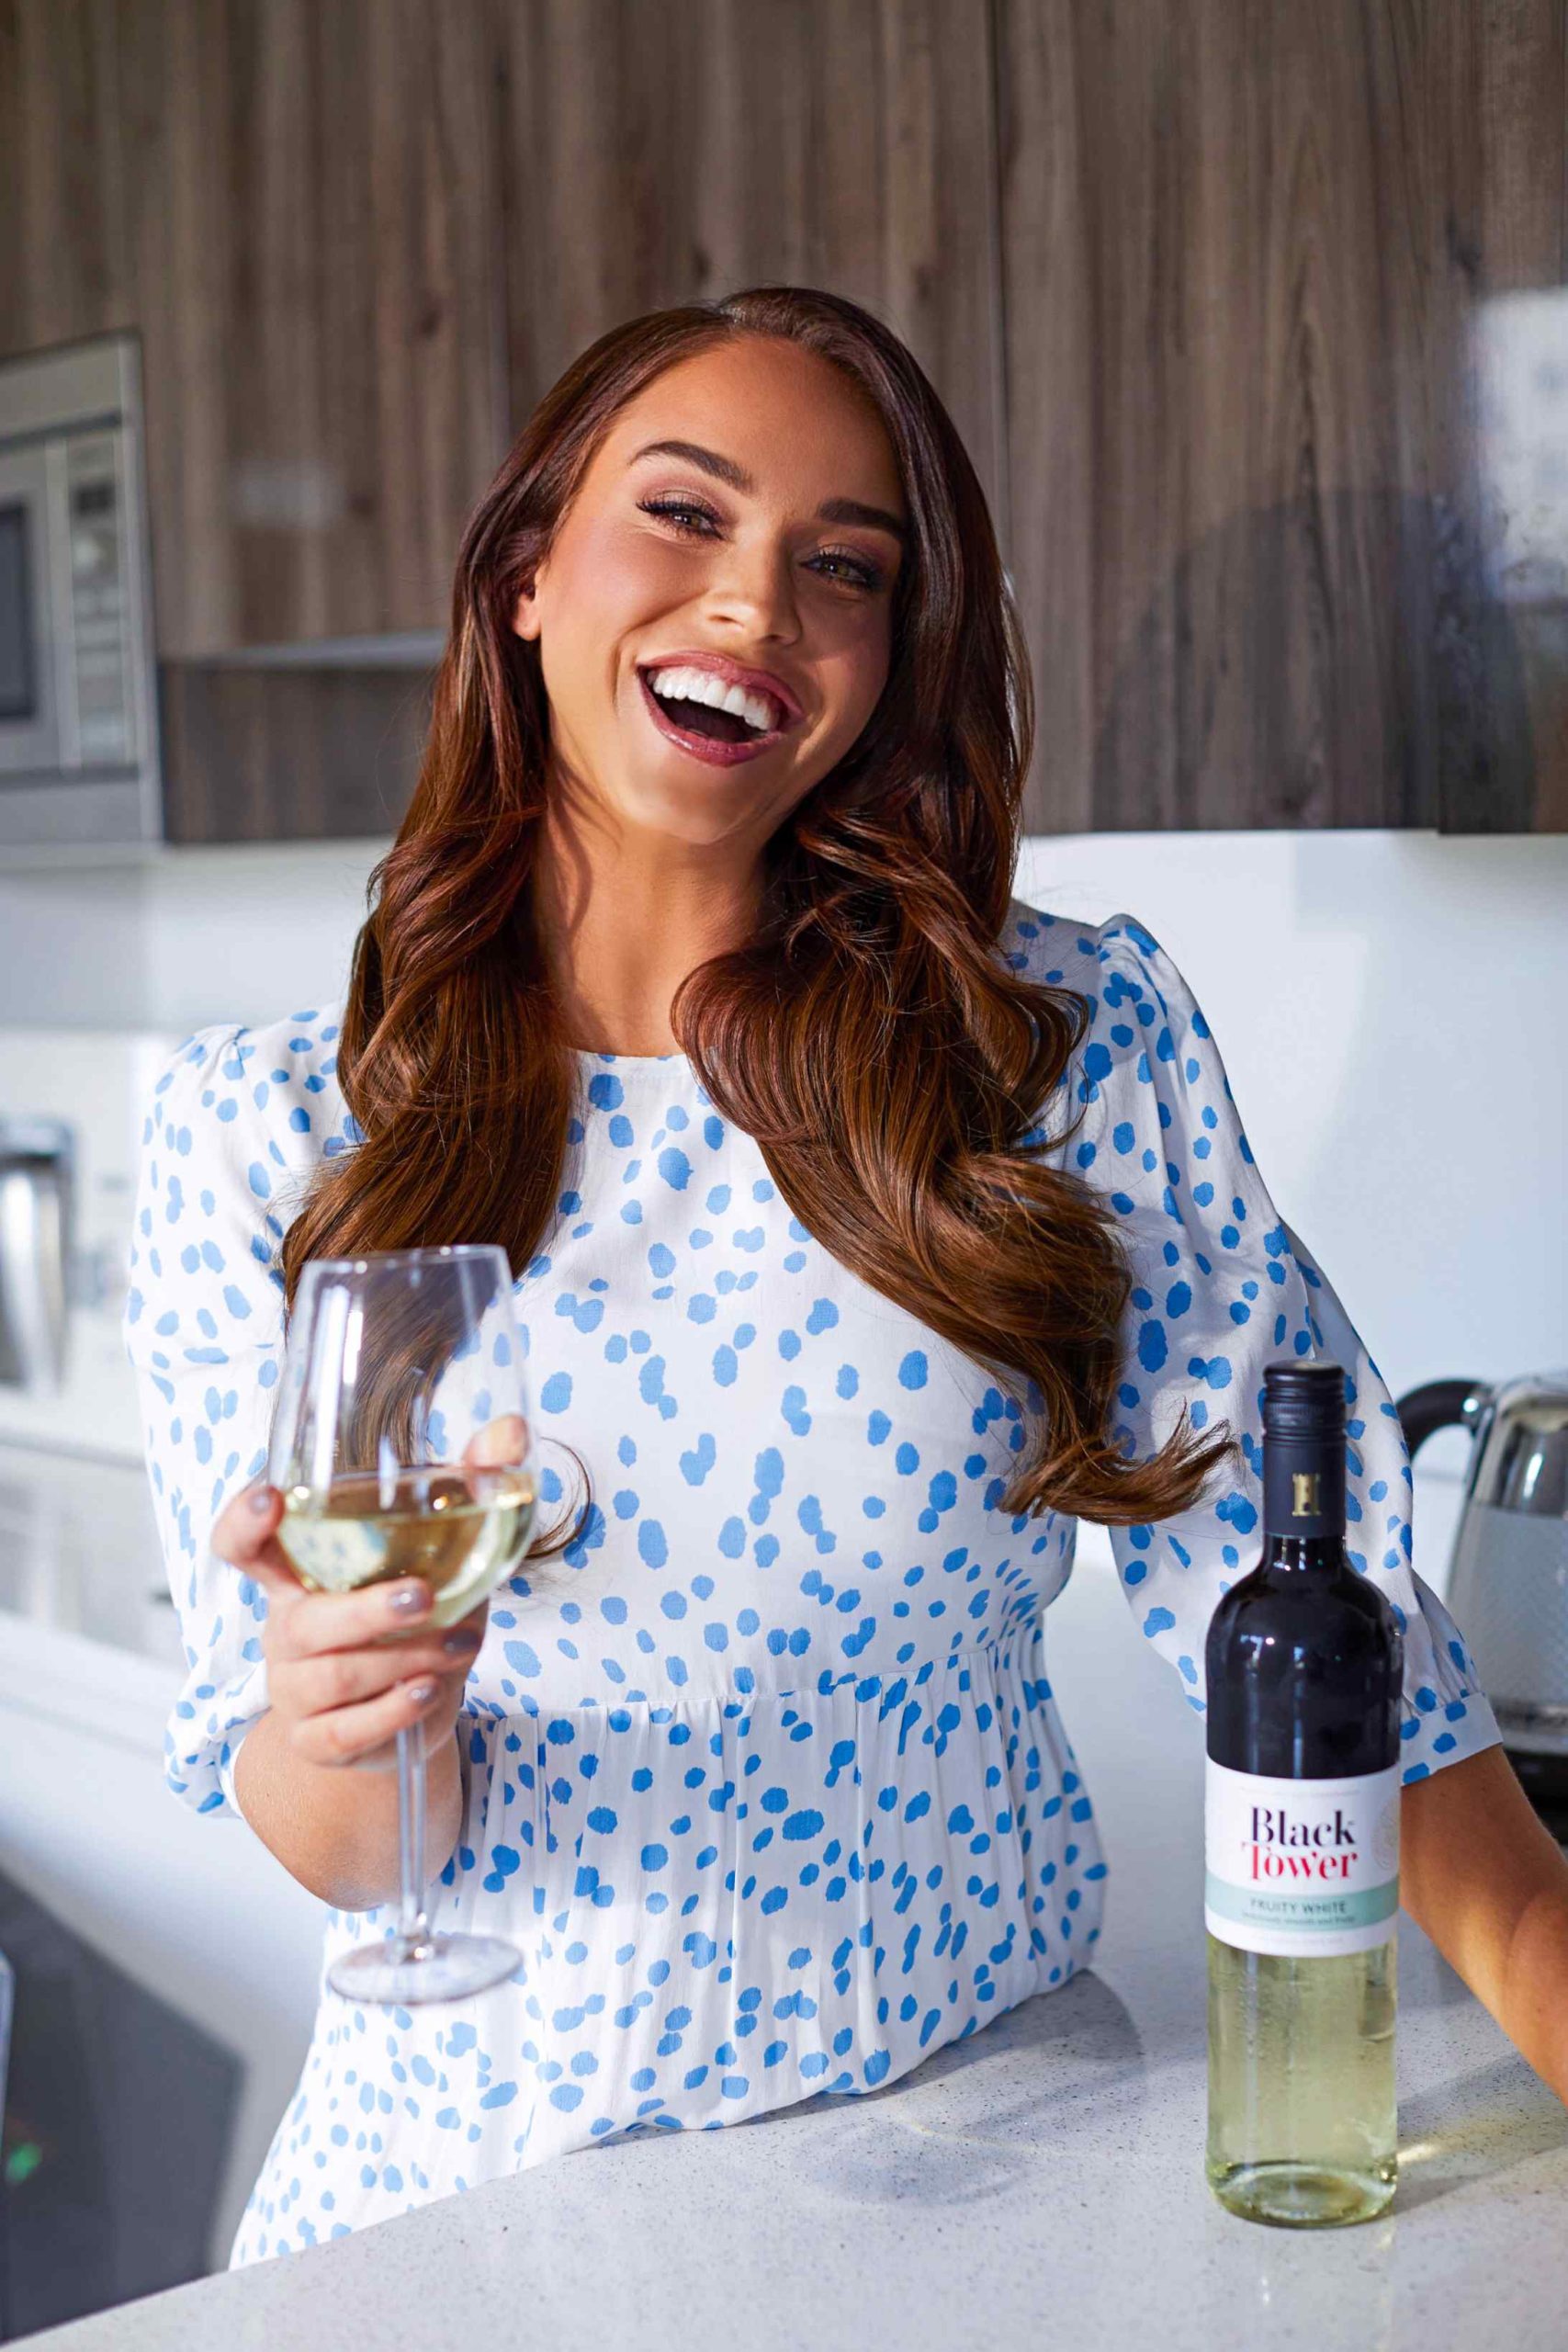 Vicky Pattison from Georgie Shore laughing whilst holding a glass of Black Tower Wine for a wine digital marketing campaign by YesMore Wine Advertising Agency